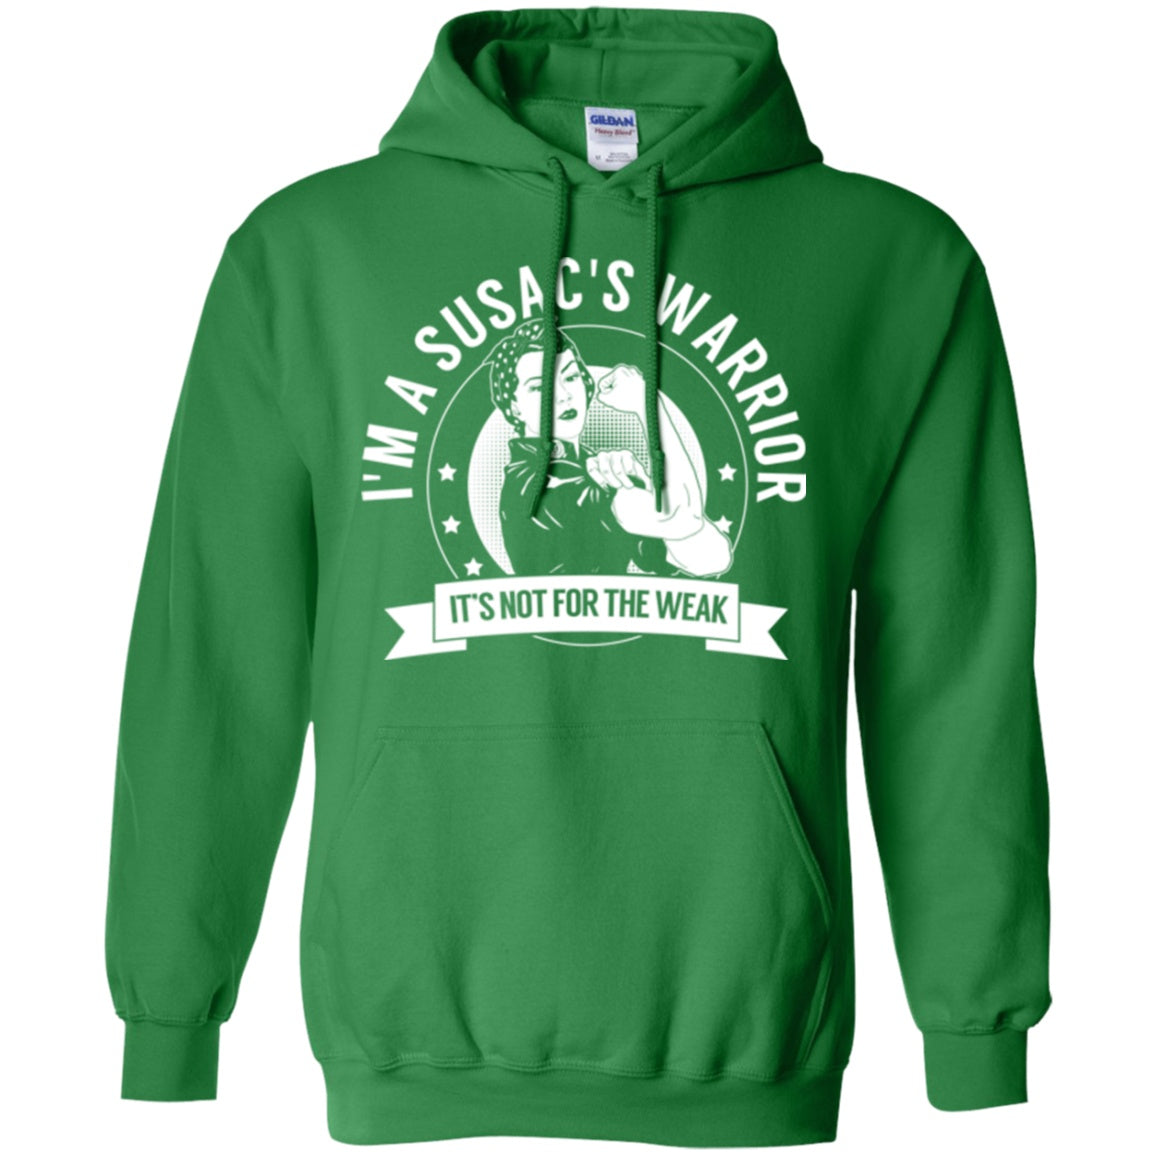 Susac's Warrior Not For The Weak Pullover Hoodie 8 oz. - The Unchargeables